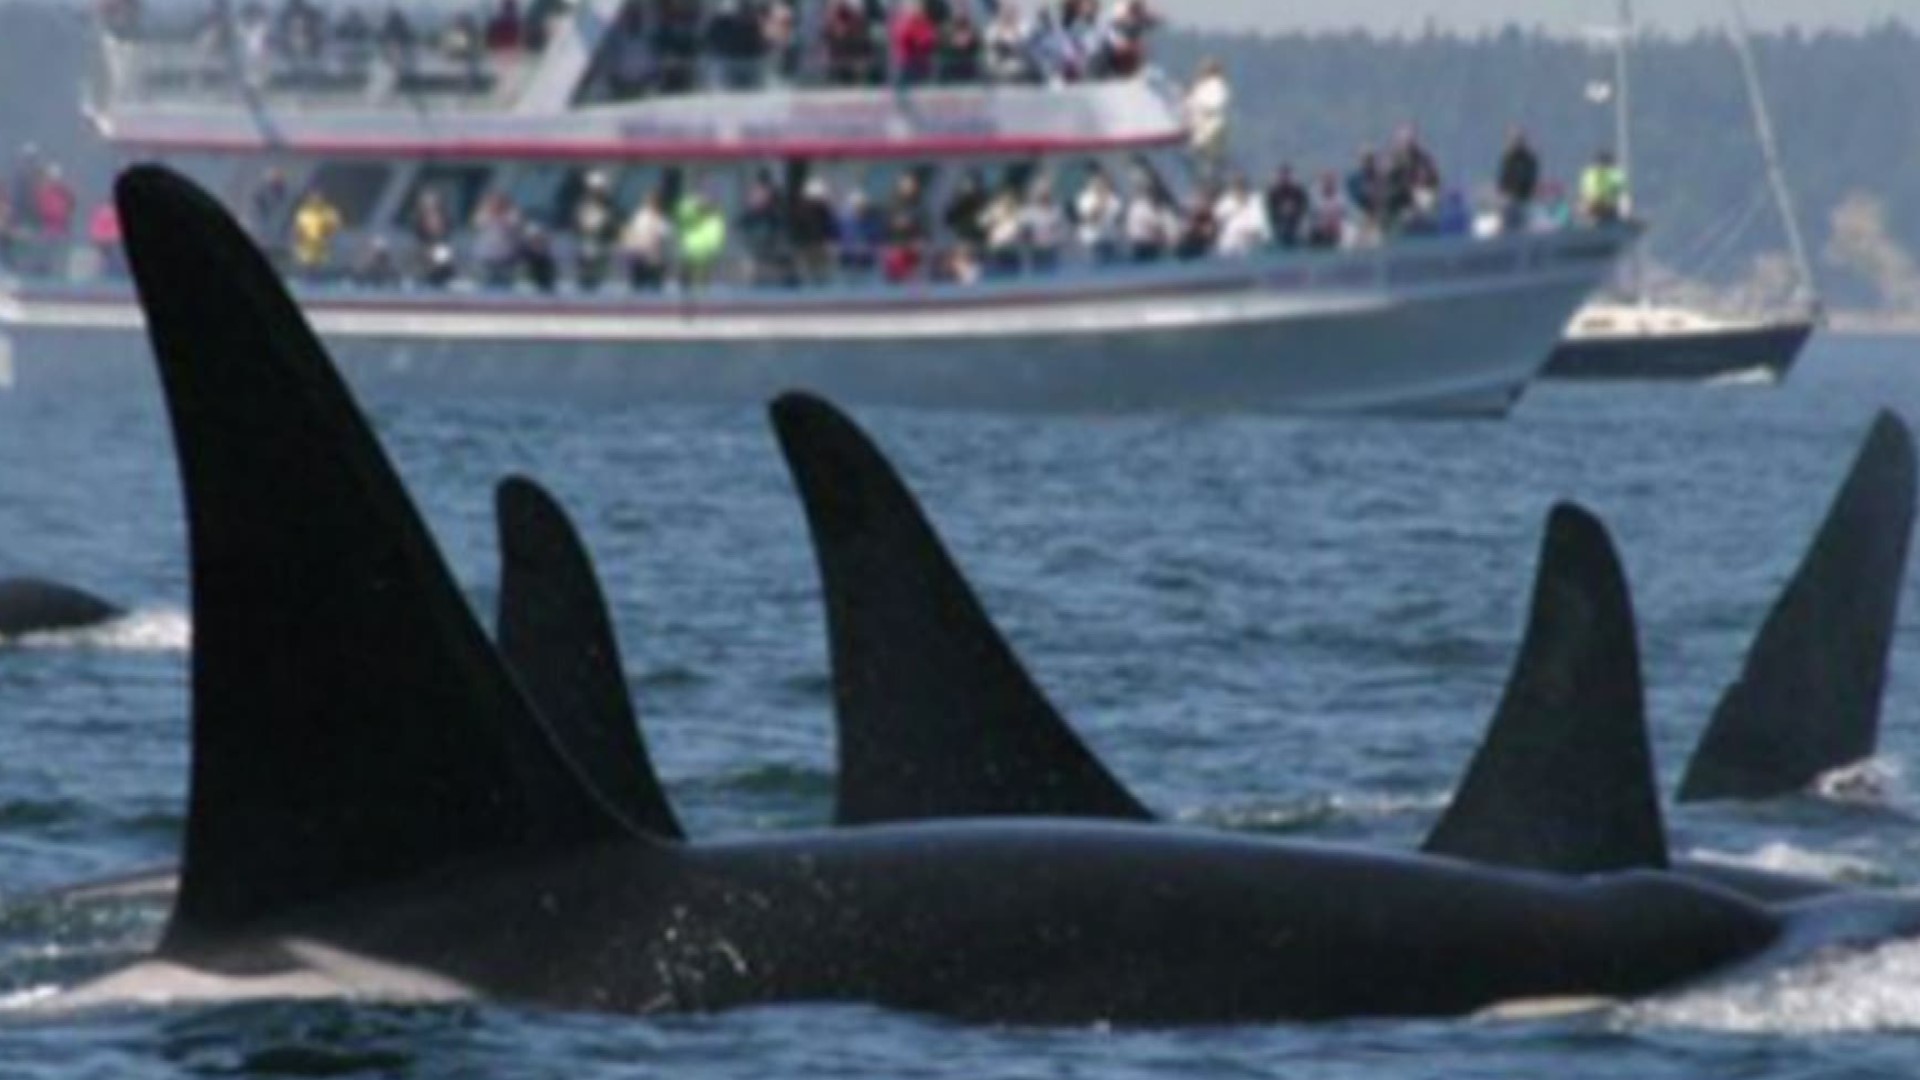 This week we are focusing on how boat noise affects the endangered Southern Resident killer whales, who need quiet waters to hunt their prey. Much of the debate has centered on whale watching boats, and whether they should be banned from following the orcas. KING 5 Environmental Reporter Alison Morrow reports.